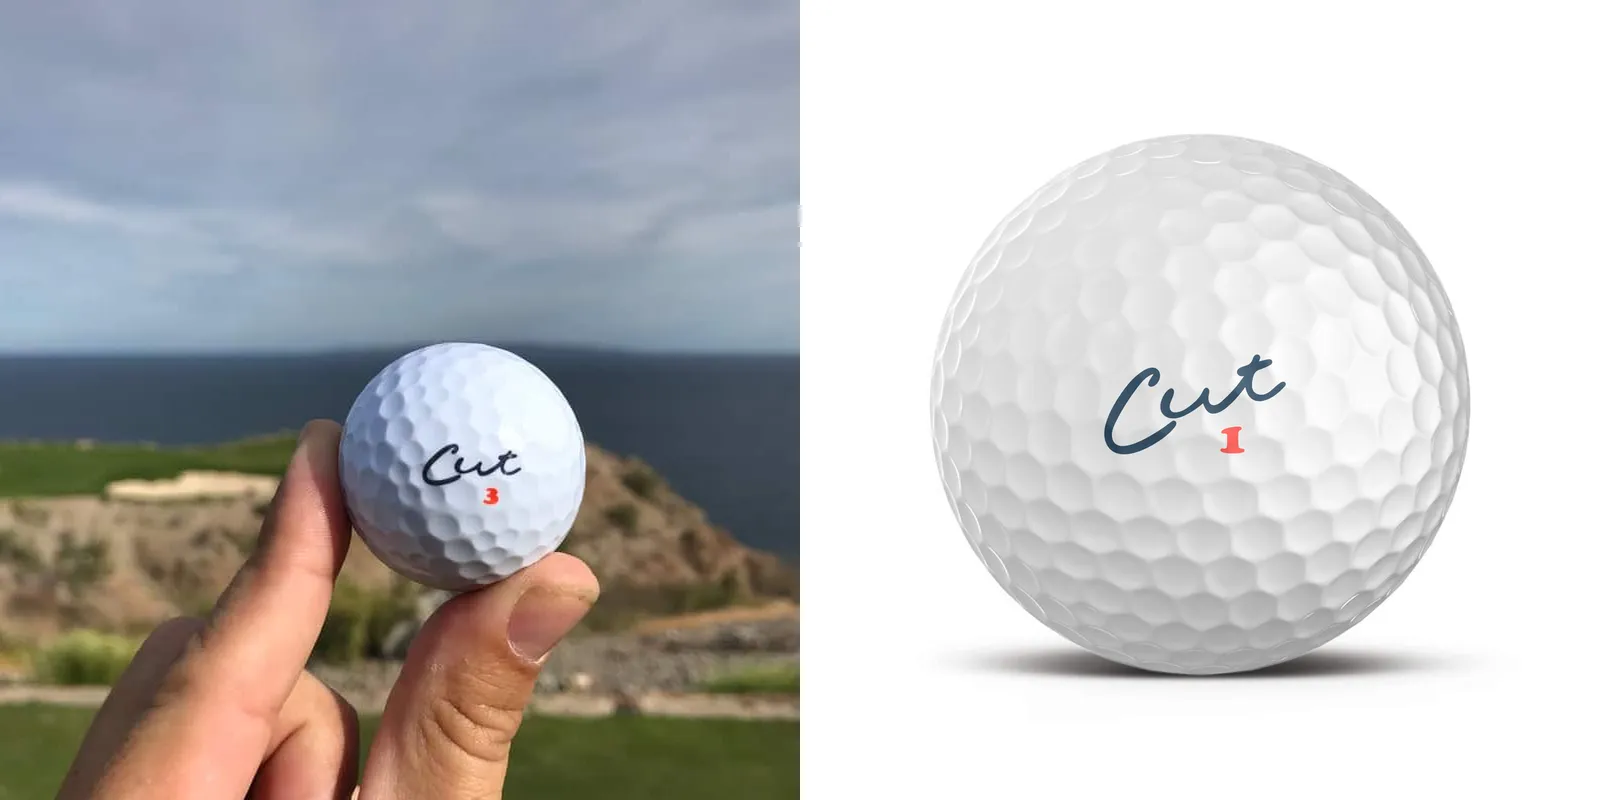 The introduction of Cut Golf Golf Ball